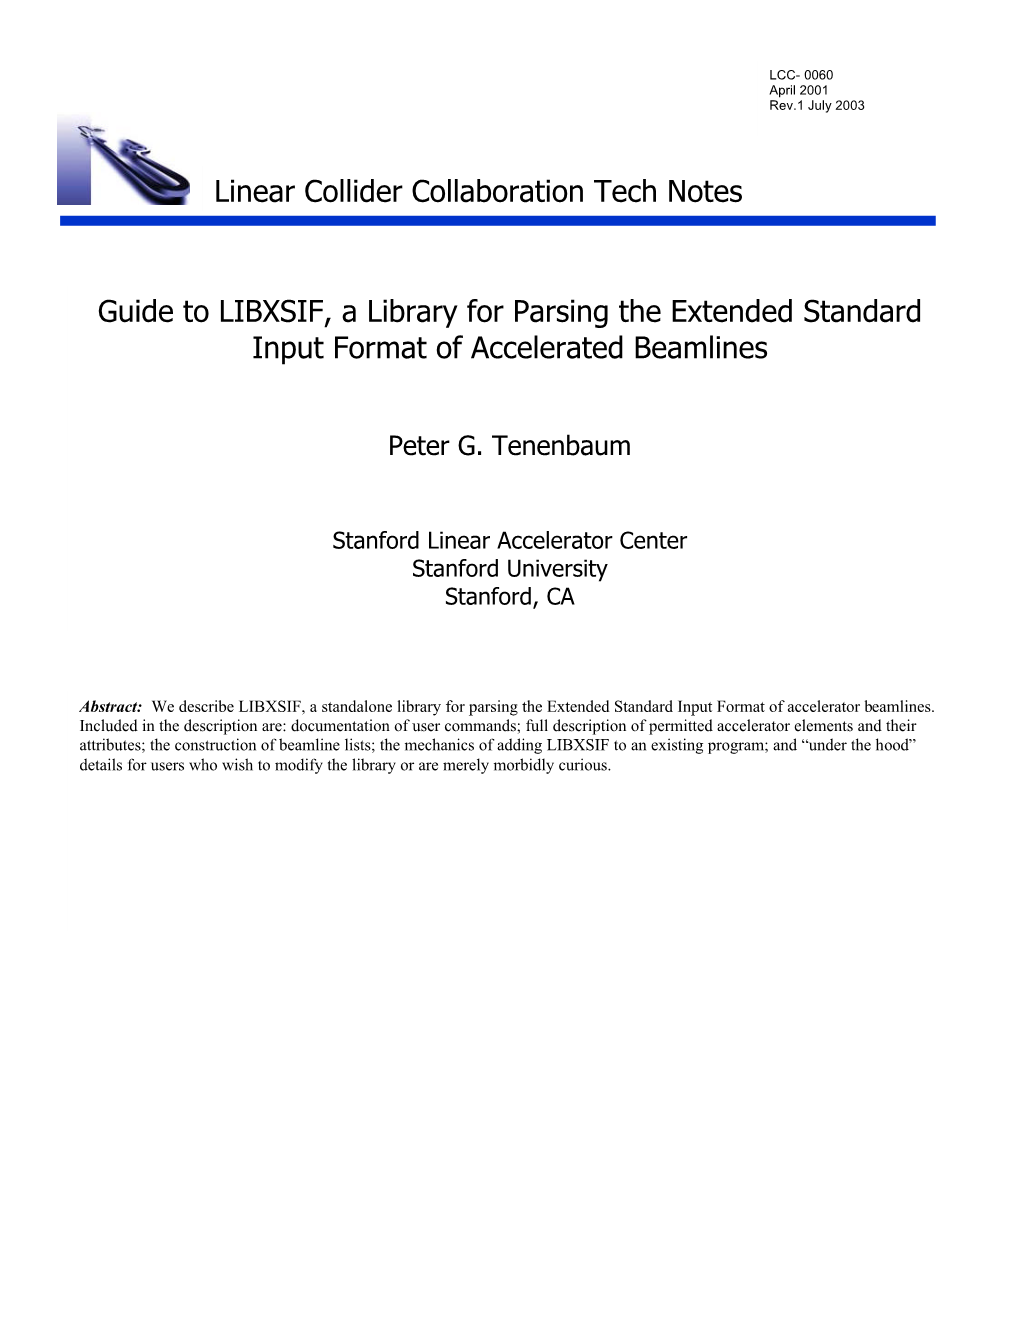 Linear Collider Collaboration Tech Notes Guide to LIBXSIF, A